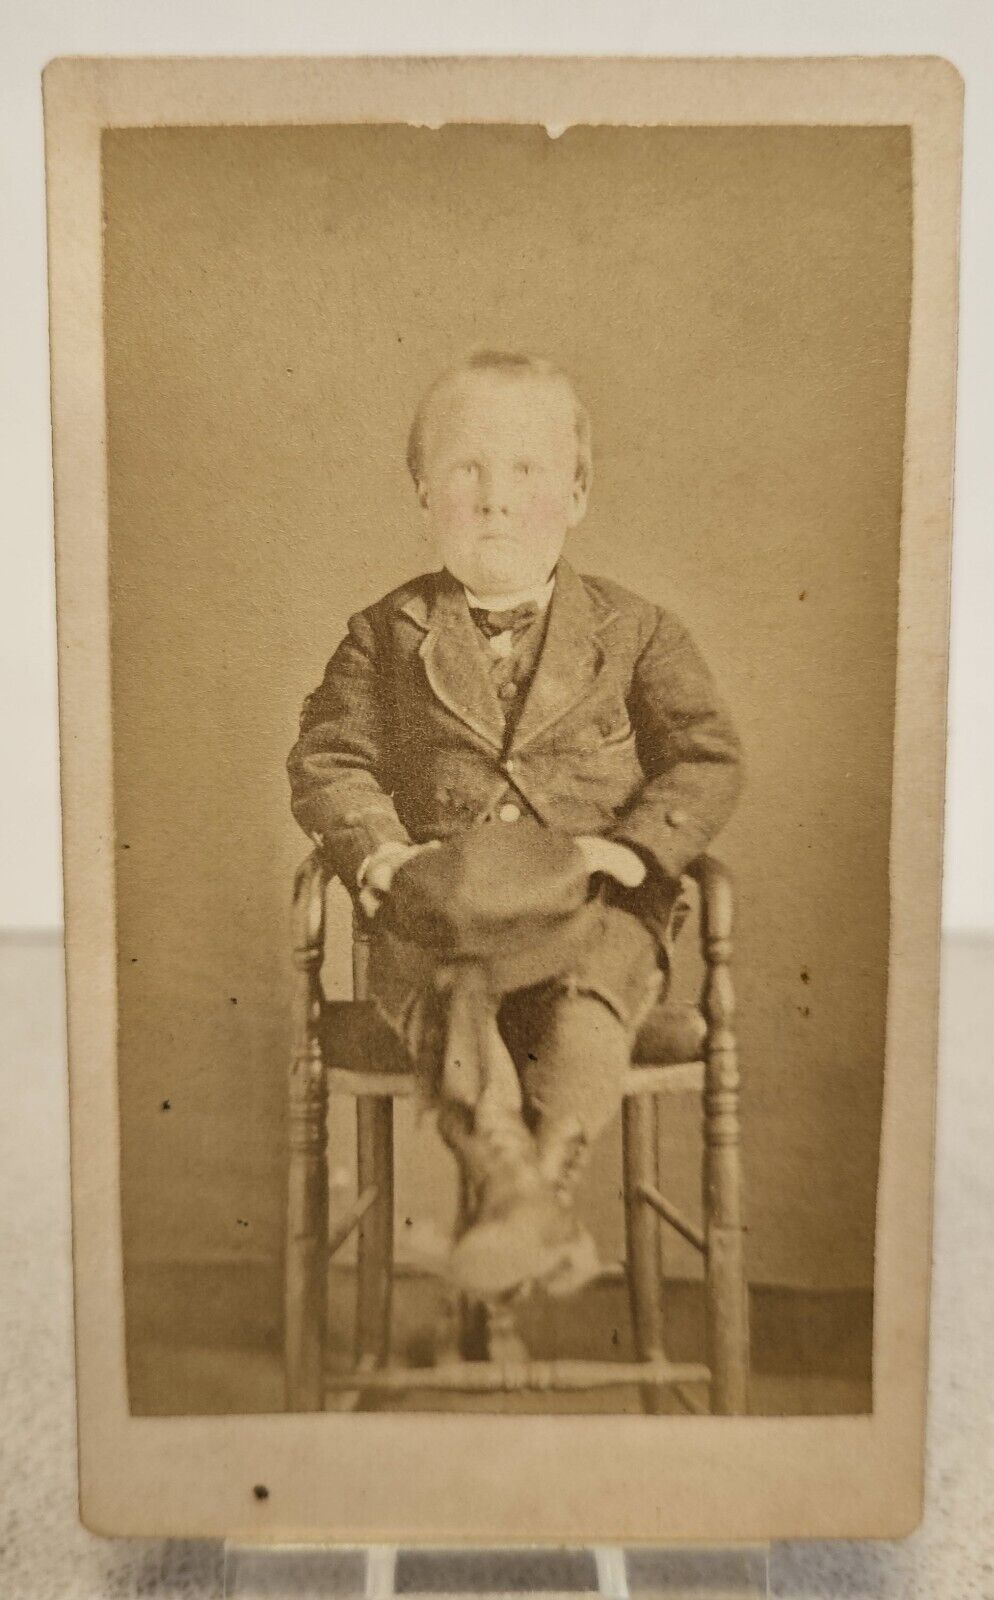 Antique 1878 CDV Hand Tinted Photo CHUBBY BOY WITH ROSY CHEEKS Seated on Chair